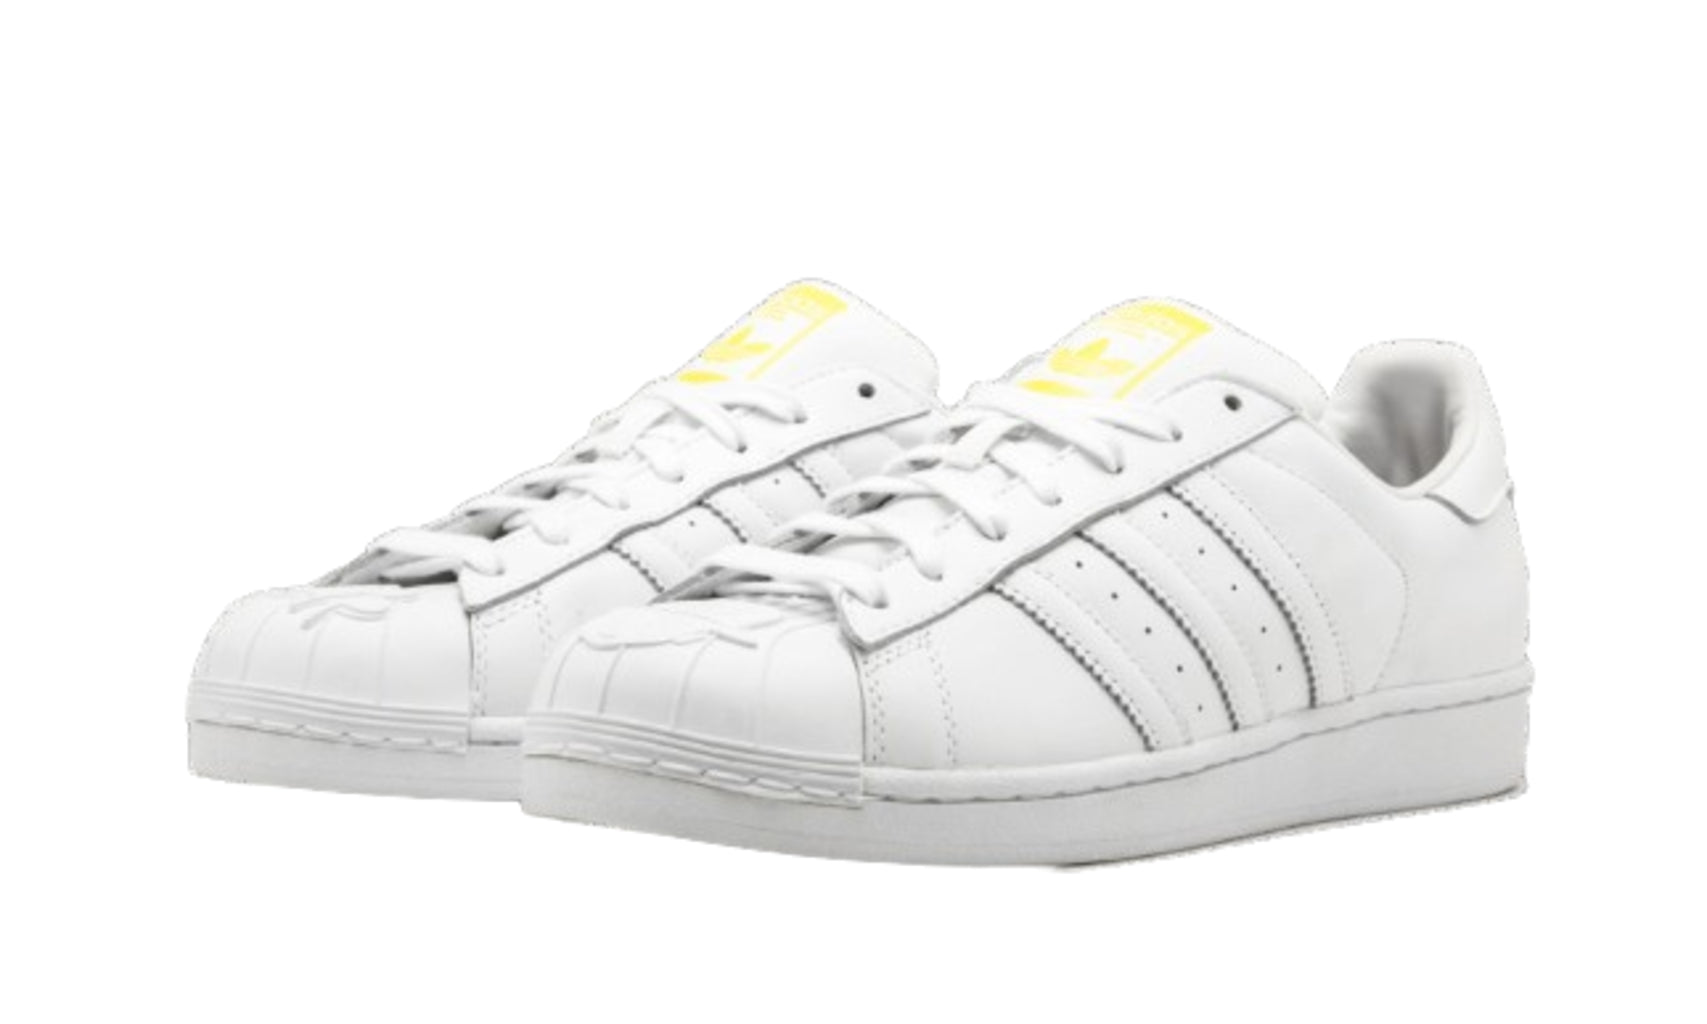 adidas Mens Superstar Supershell Fashion Sneakers